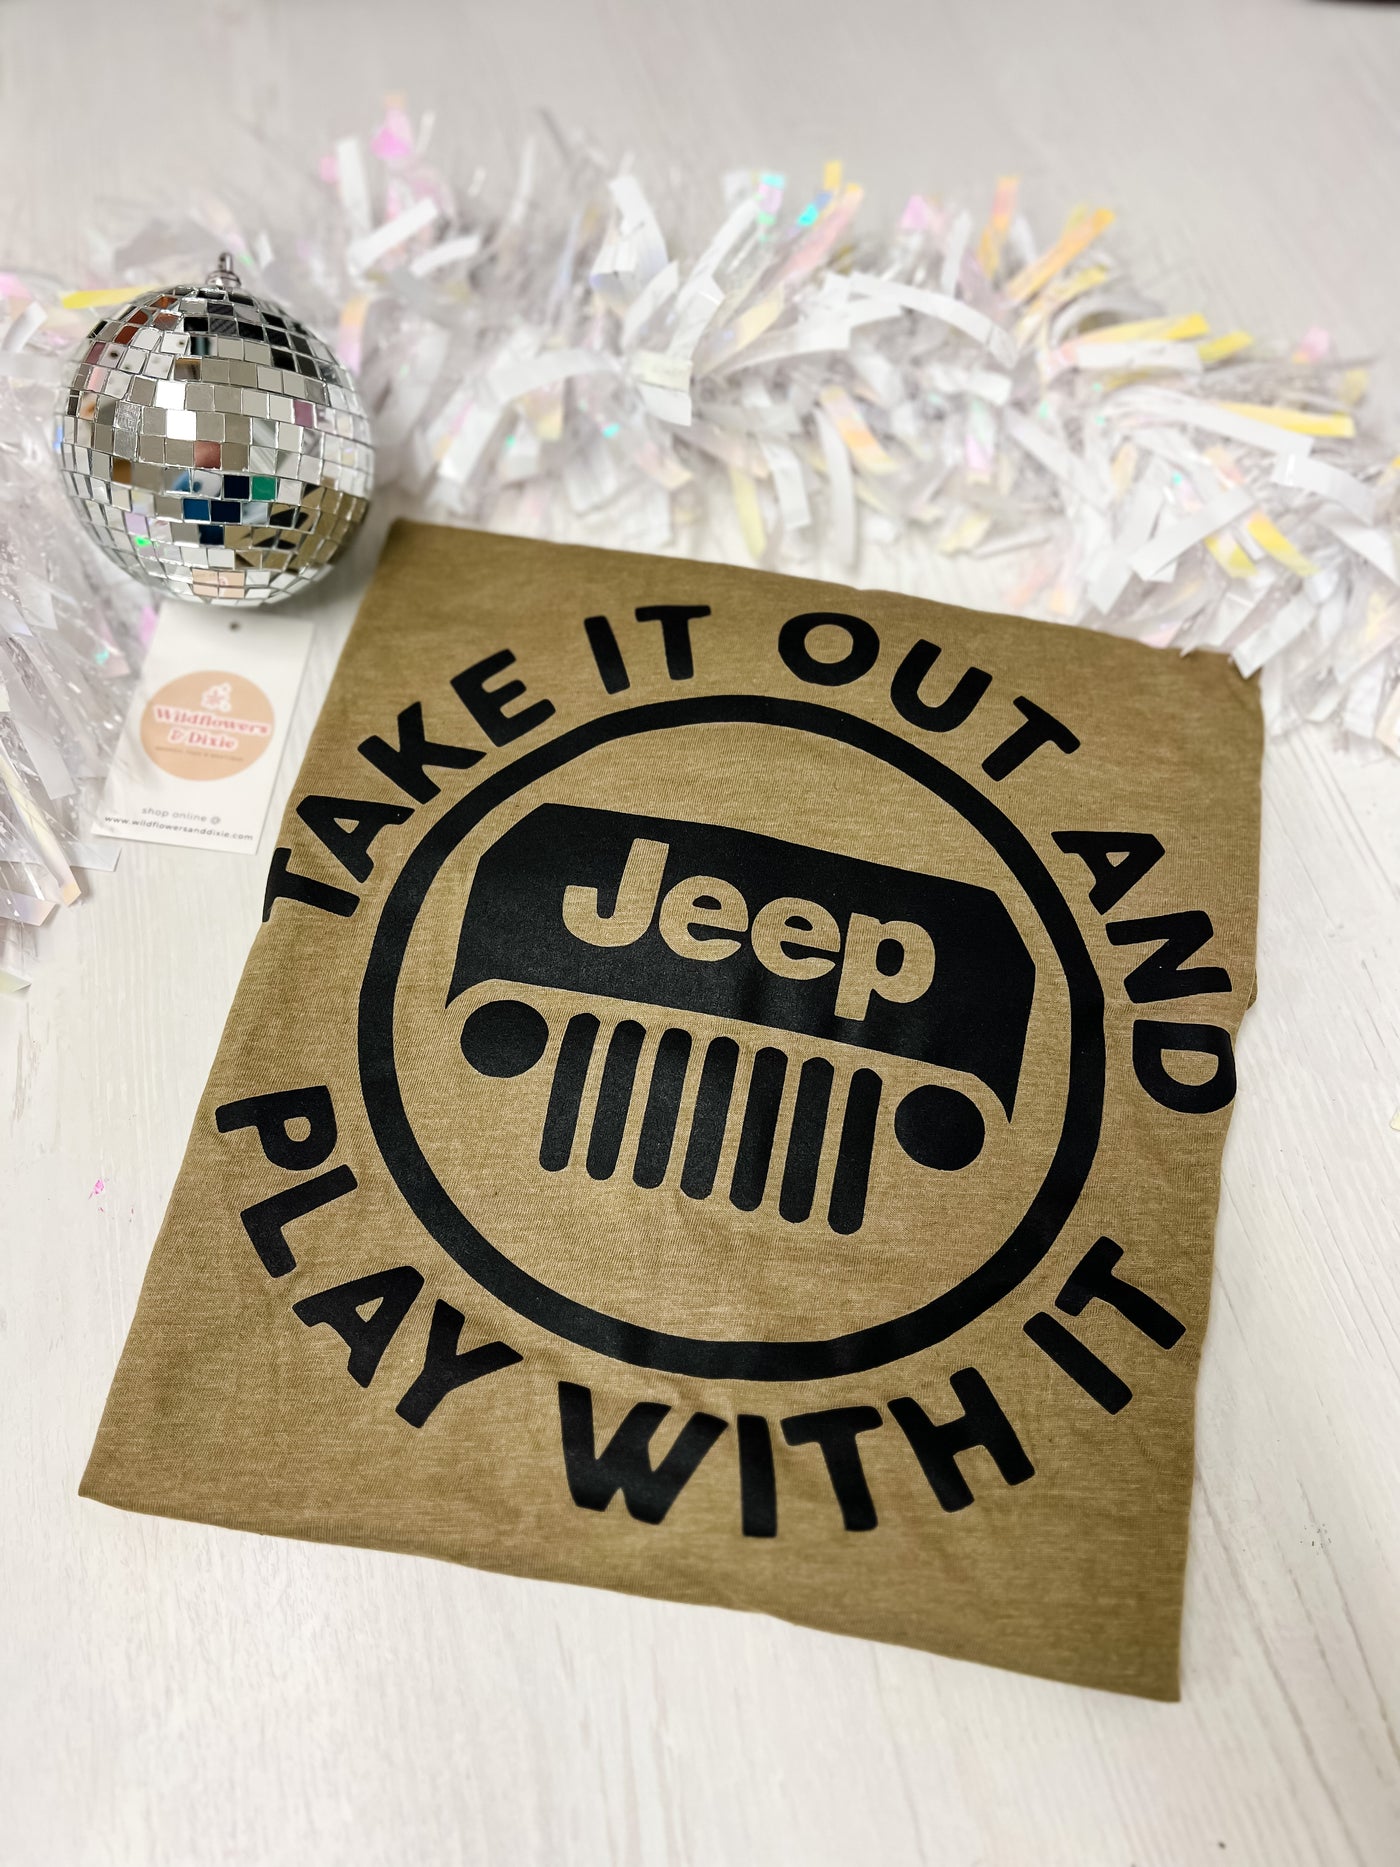 READY TO SHIP "JEEP - Take It Out and Play with It" T-shirt